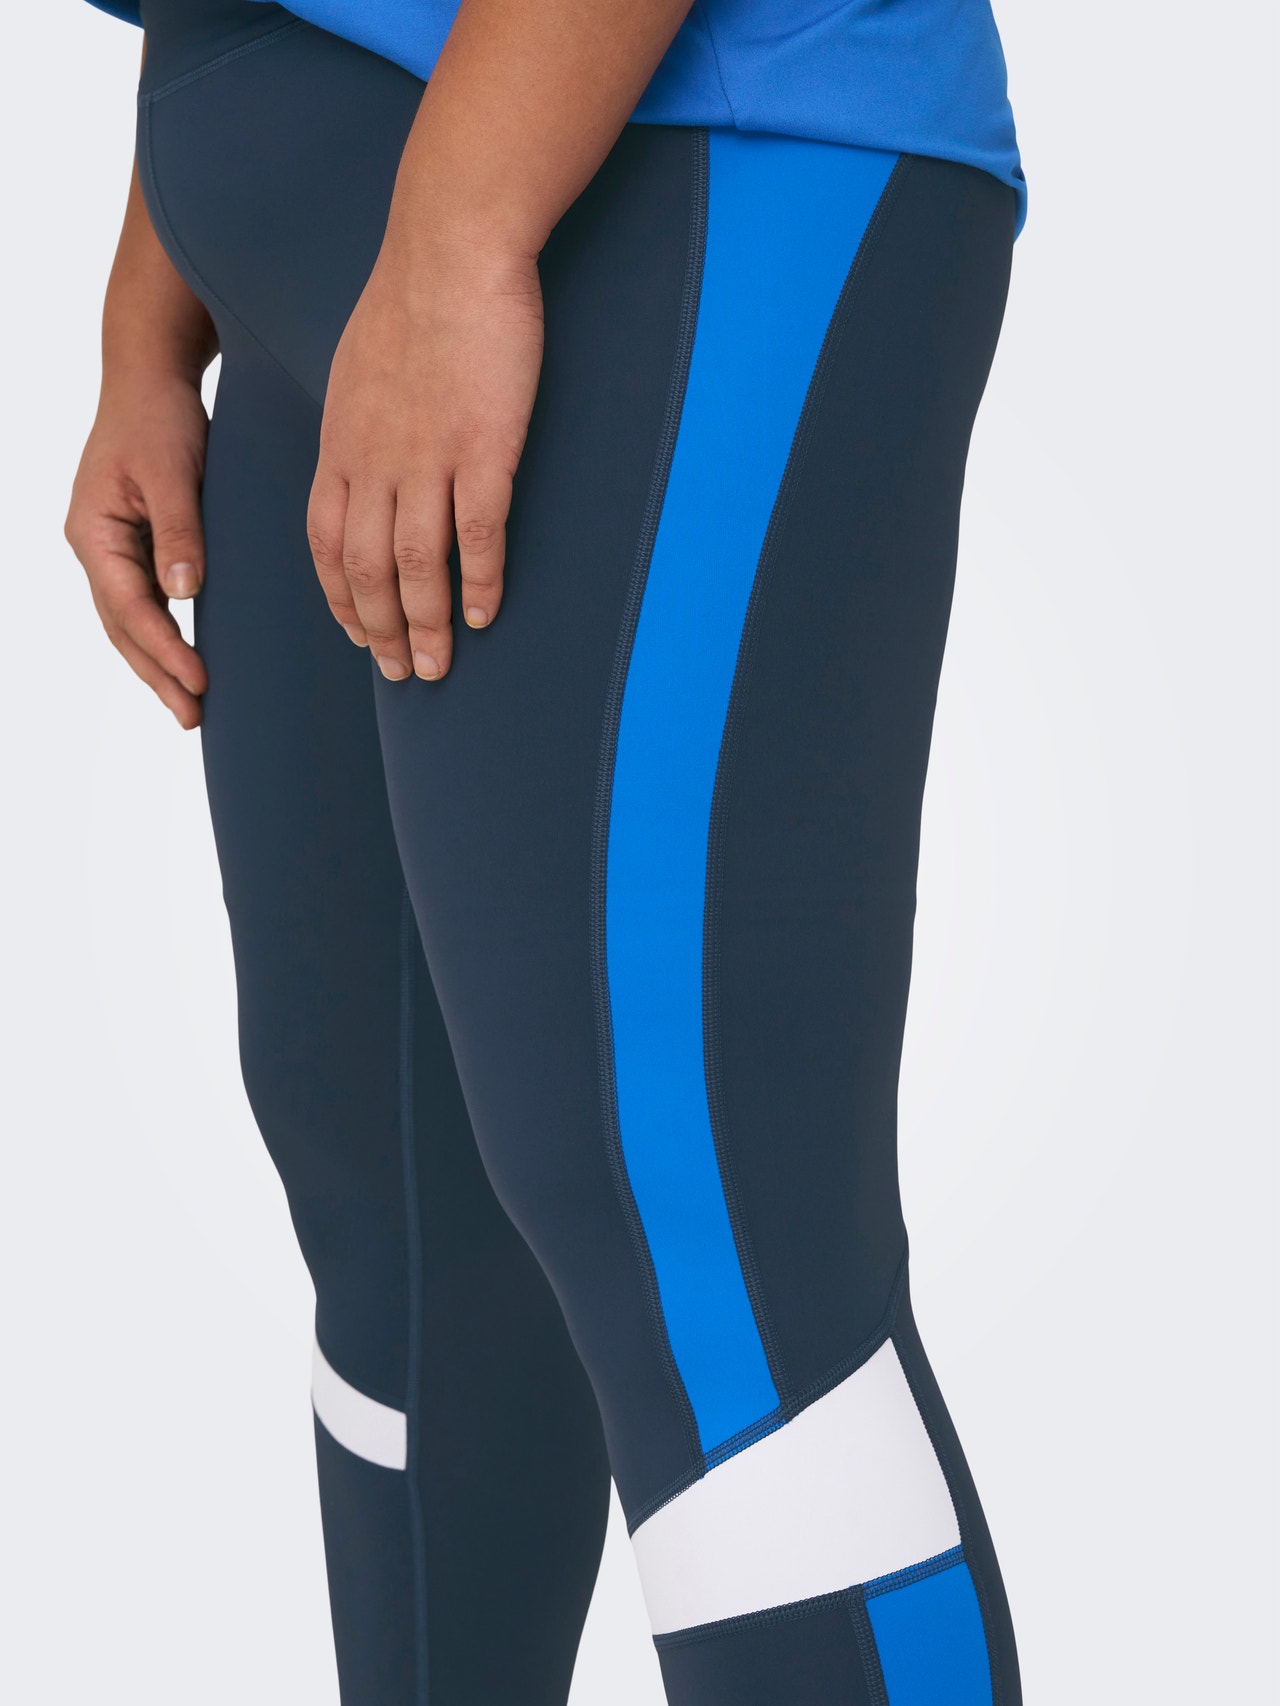 ONLY Tight fit High waist Curve Legging -Blue Nights - 15282323